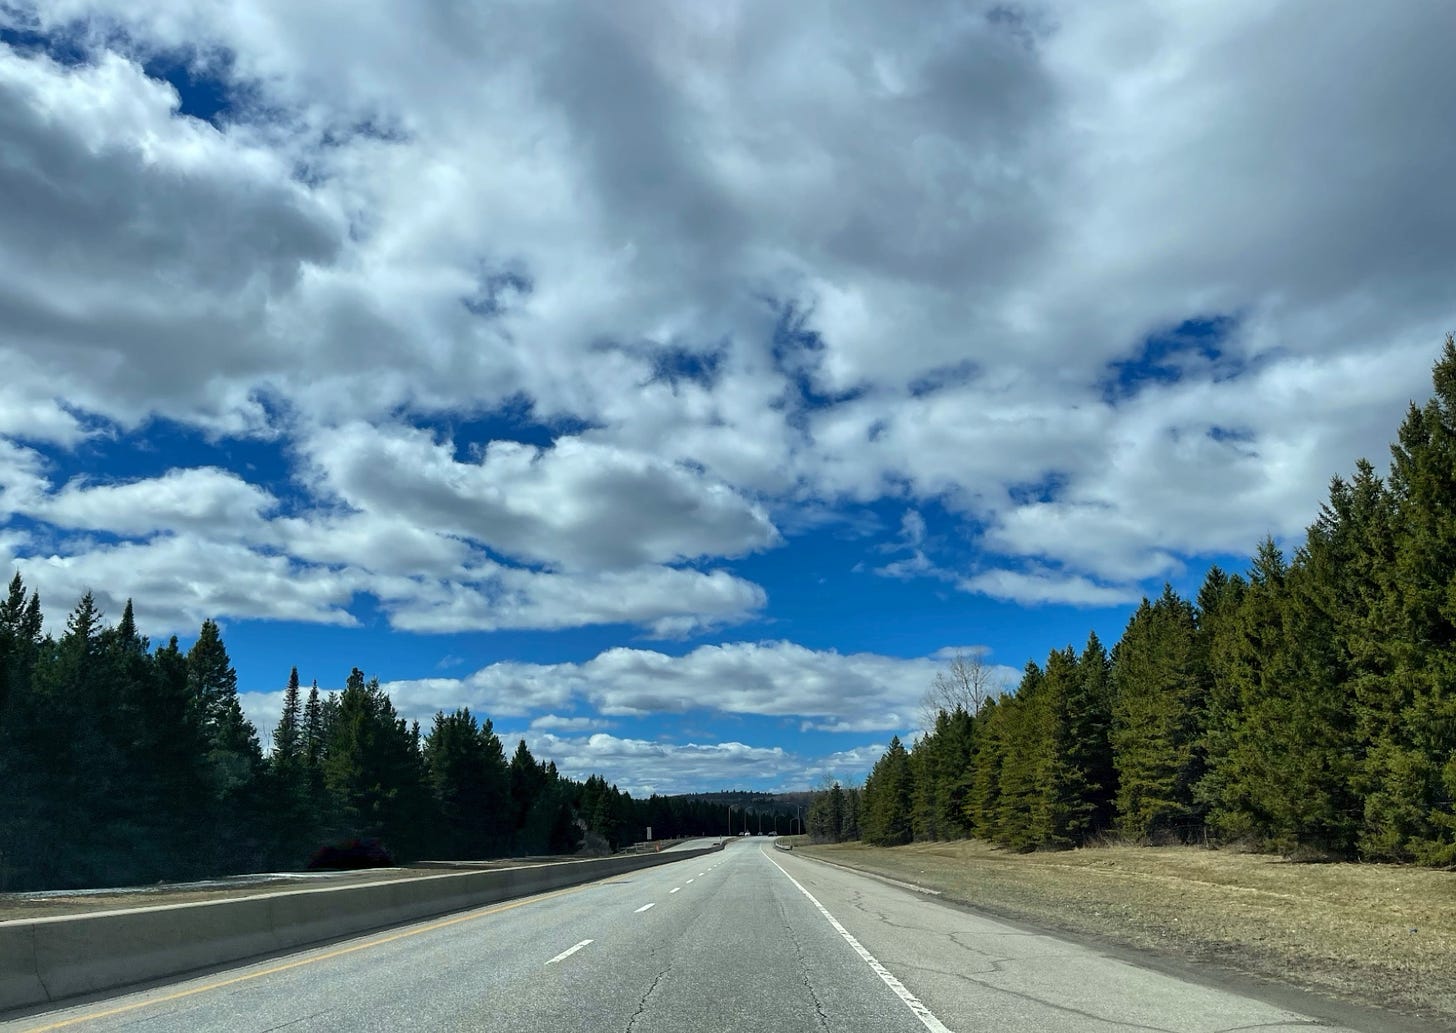 photo taken through the windshield on an empty Canadian highway with blue sky, white clouds and spur trees on both sides